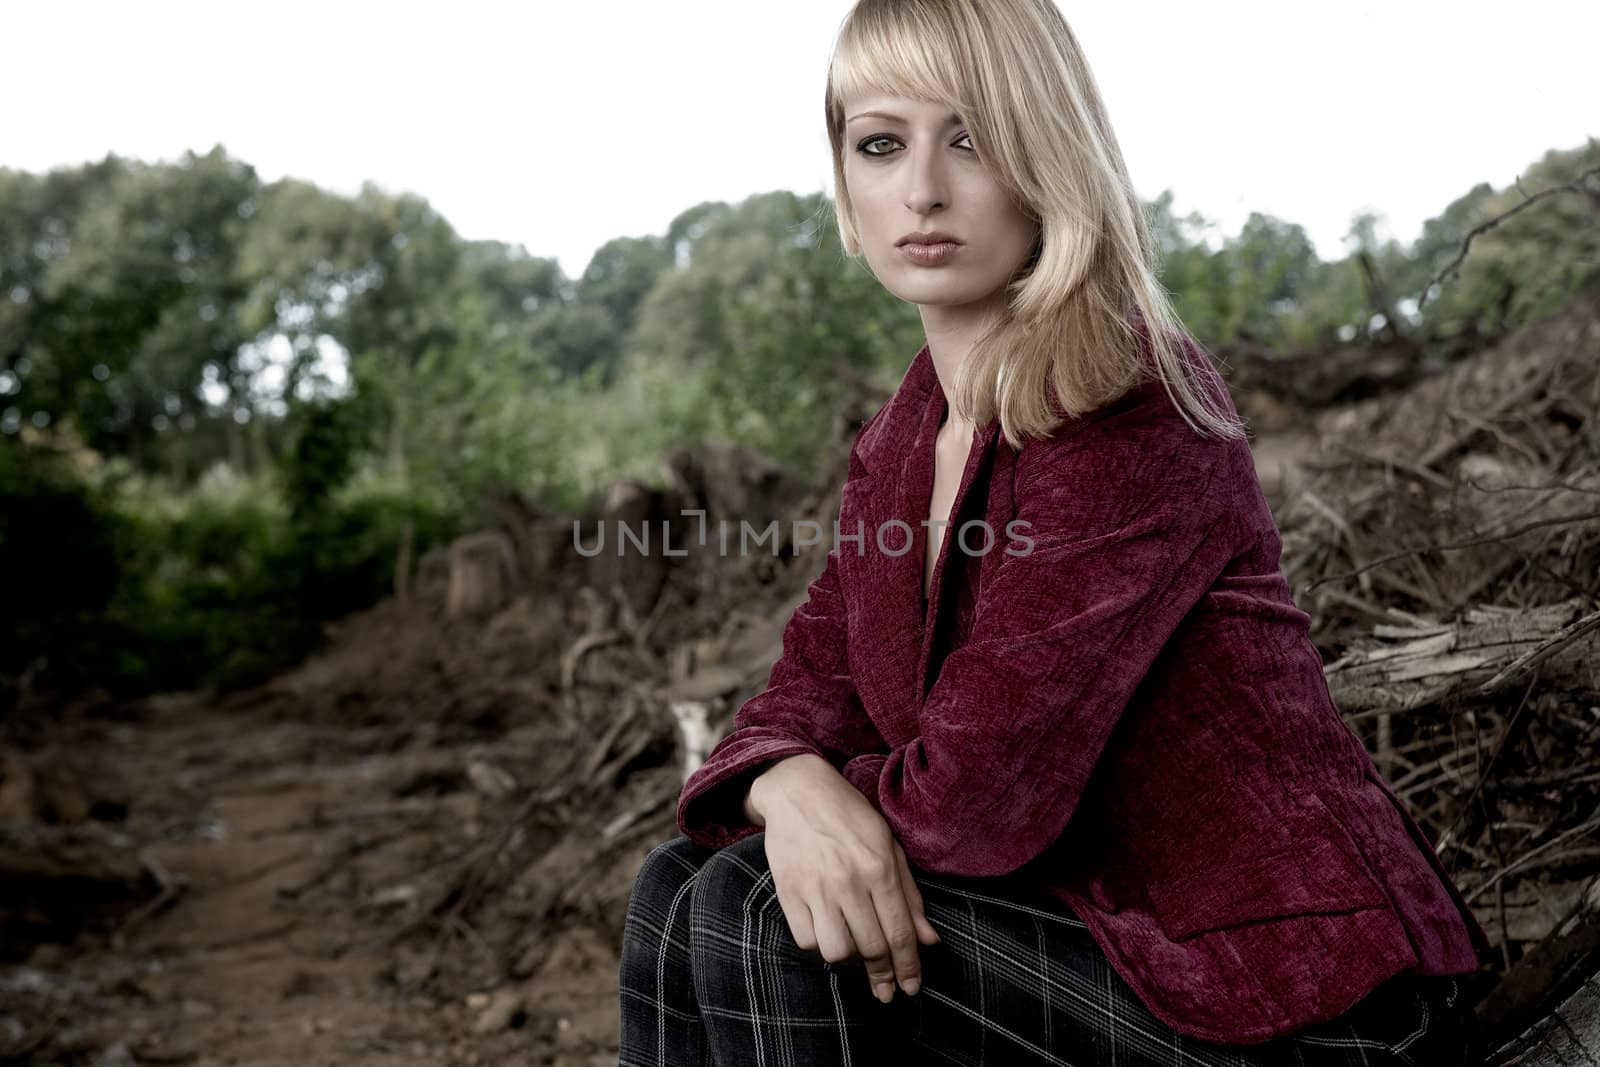 Fashion shoot of a woman sitting on the ground